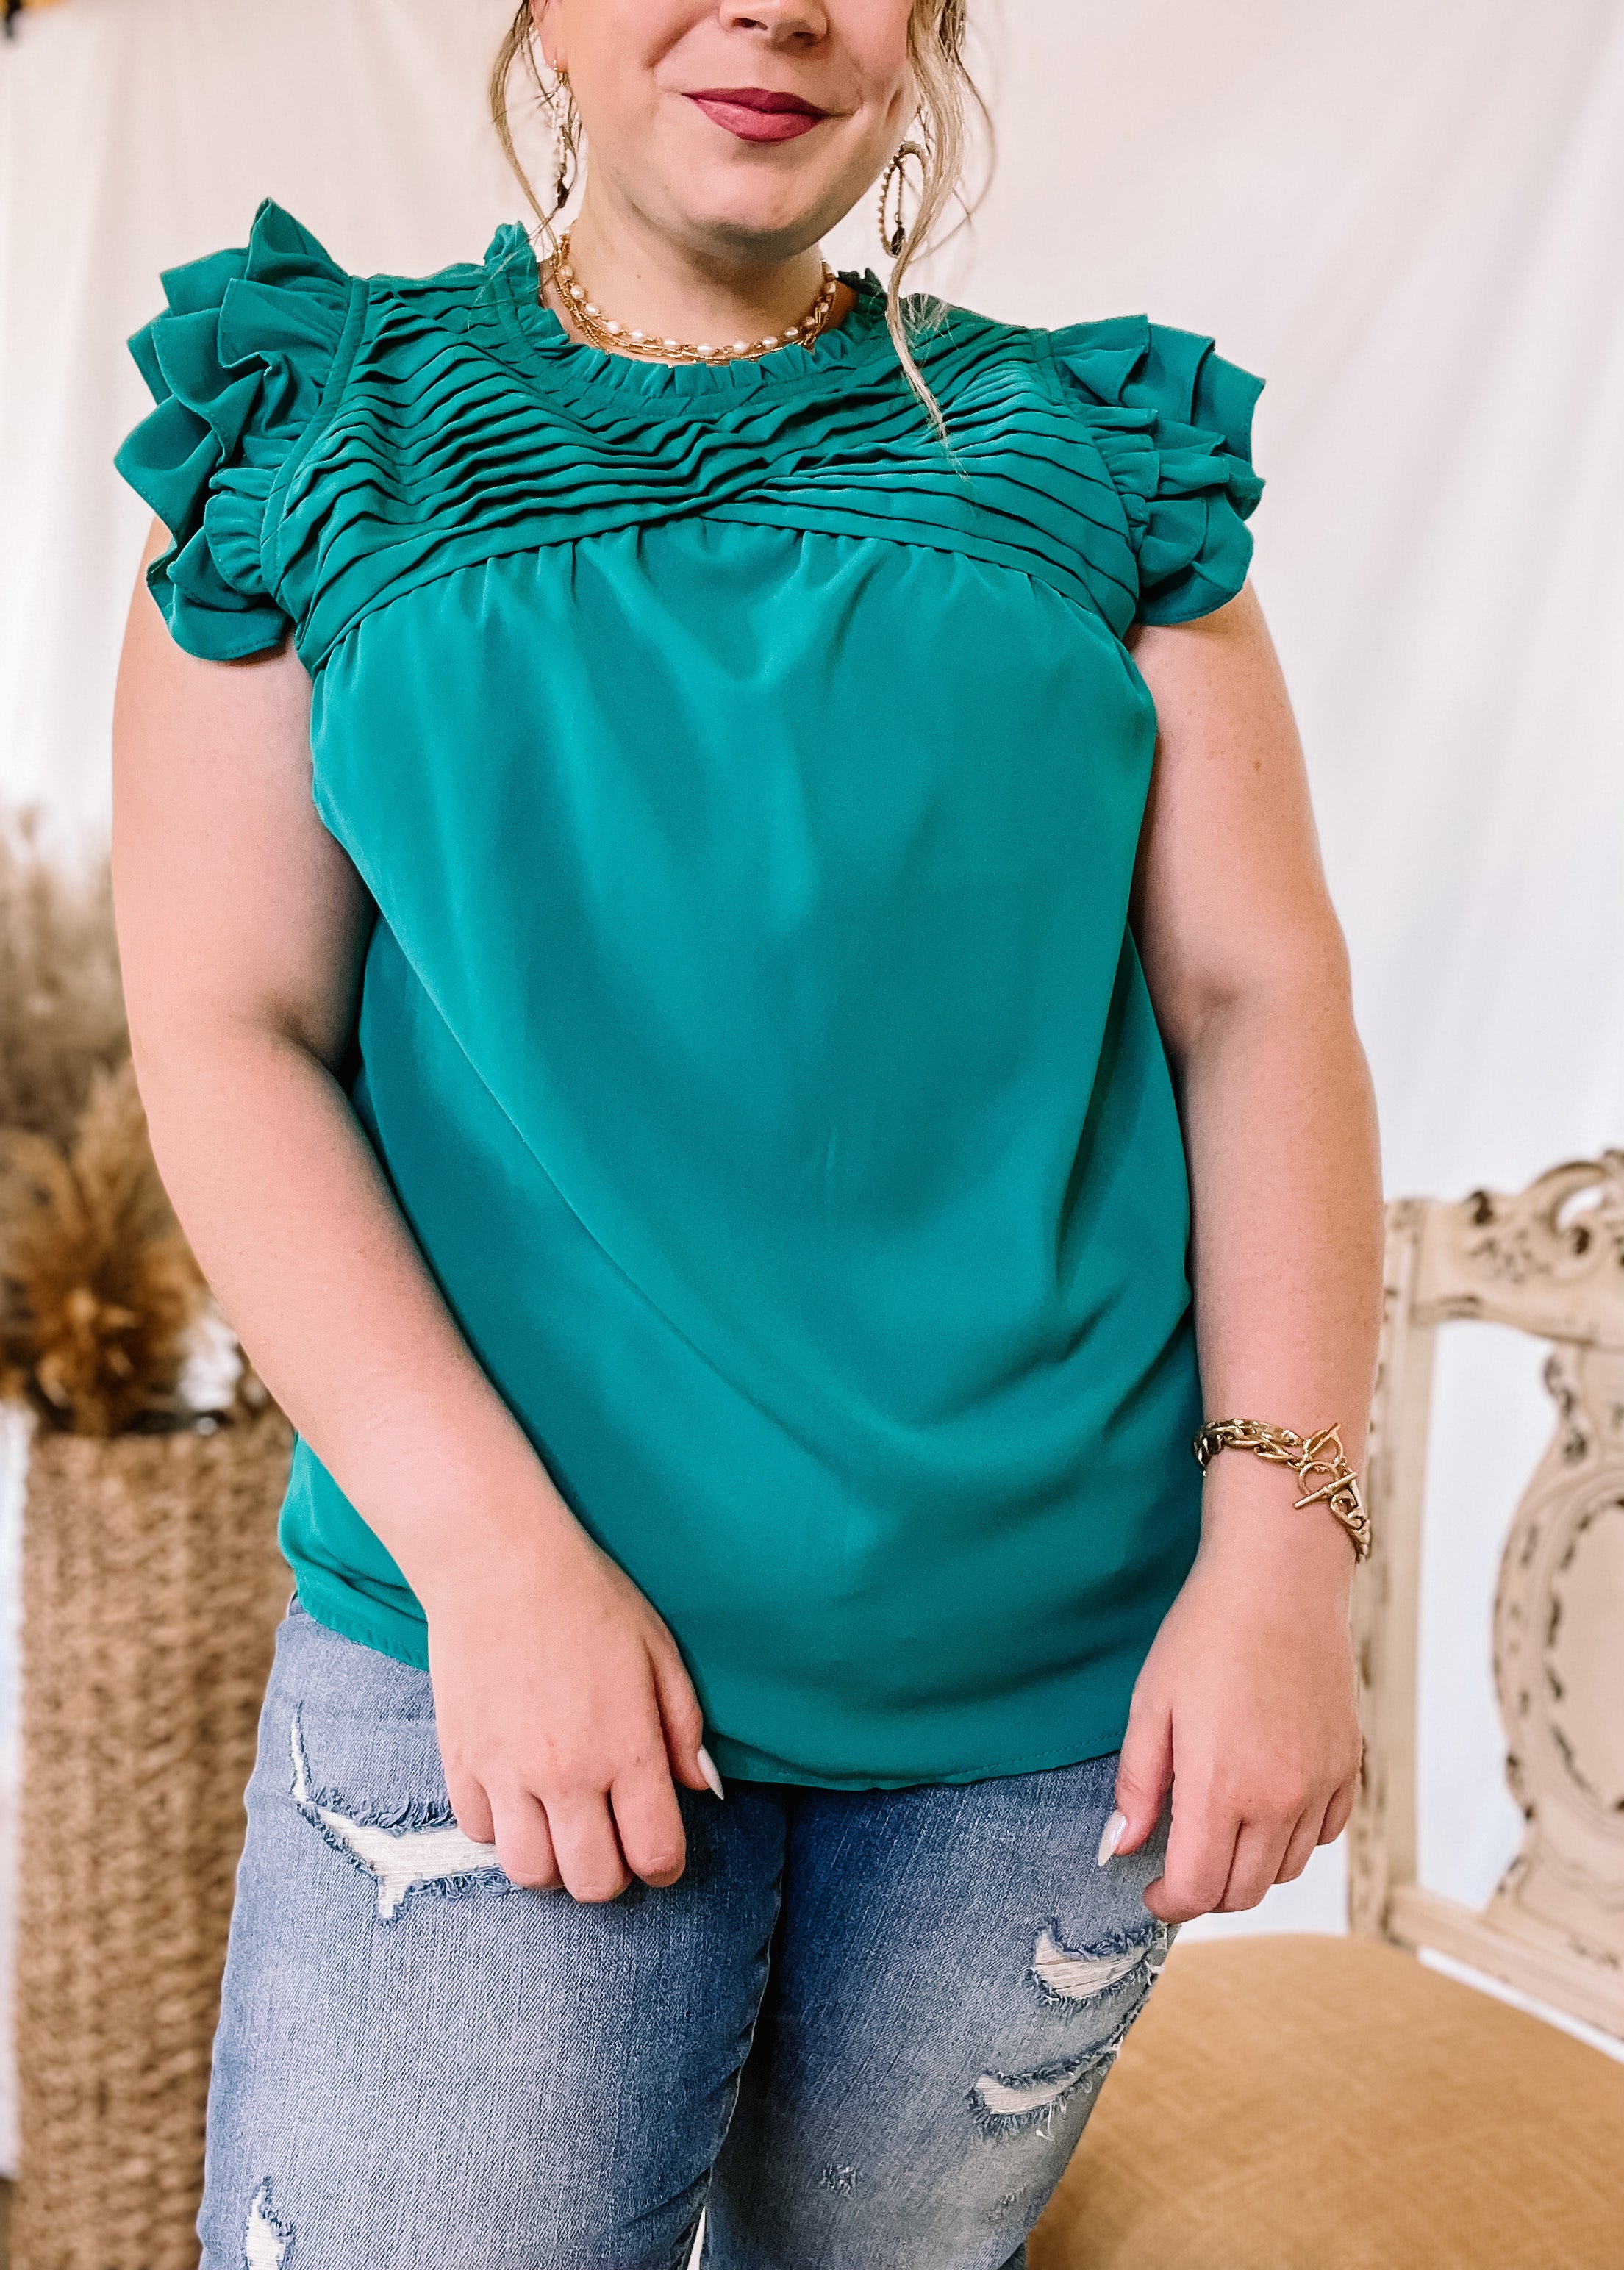 Expect The Best Pleated Upper Blouse with Ruffle Cap Sleeves in Teal Green - Giddy Up Glamour Boutique